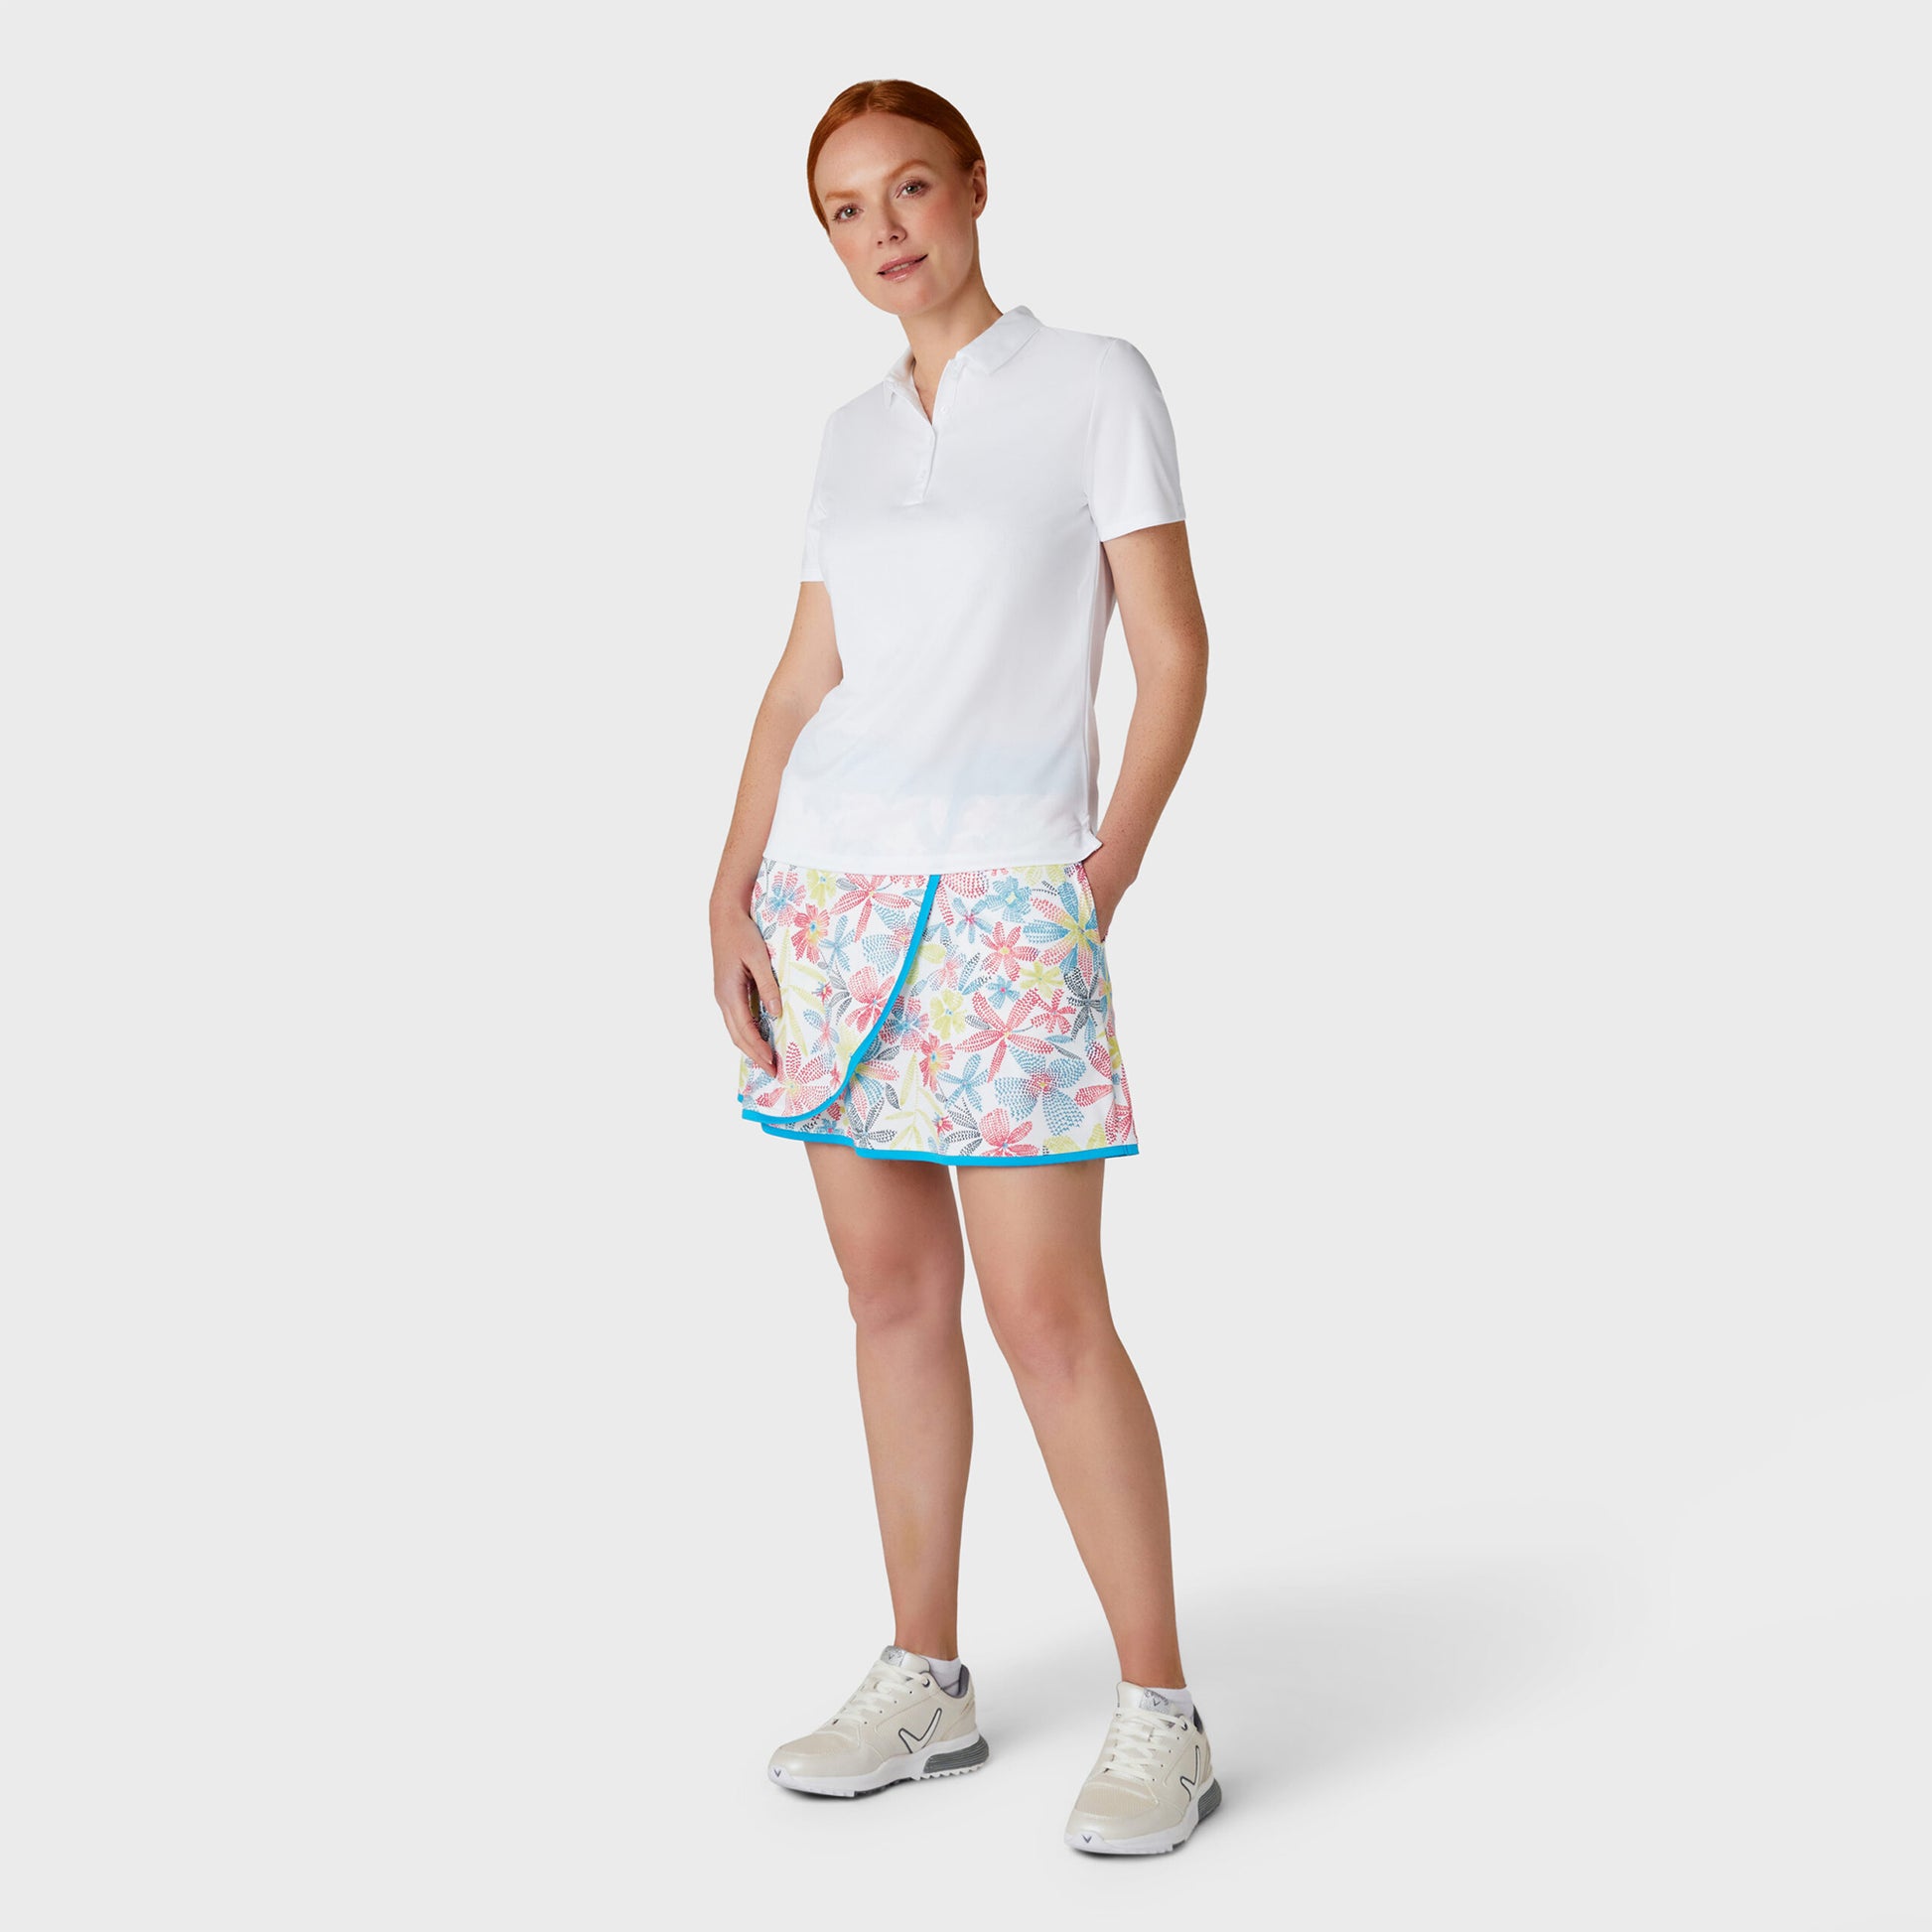 Callaway Ladies Bright White Short Sleeve Polo with UV Block Protection